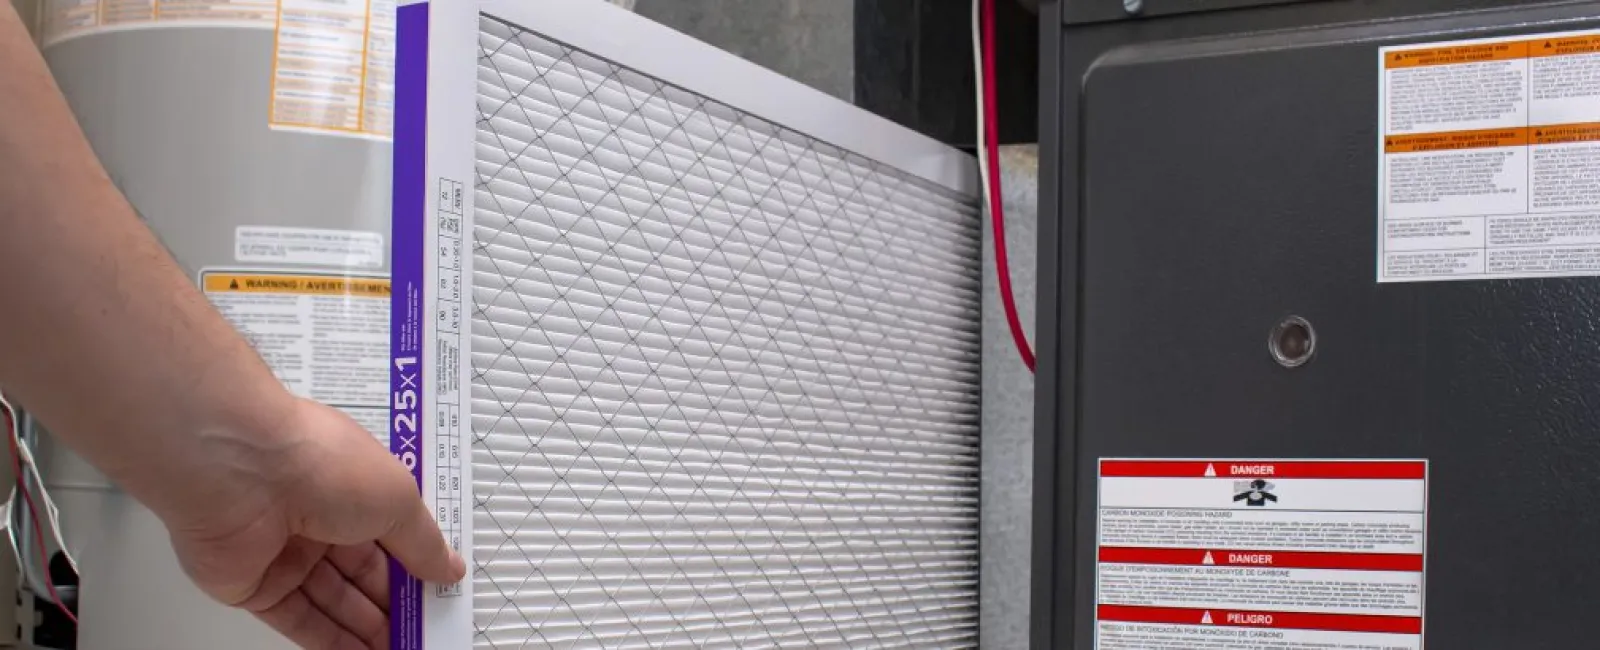 How often should you change your furnace filter?